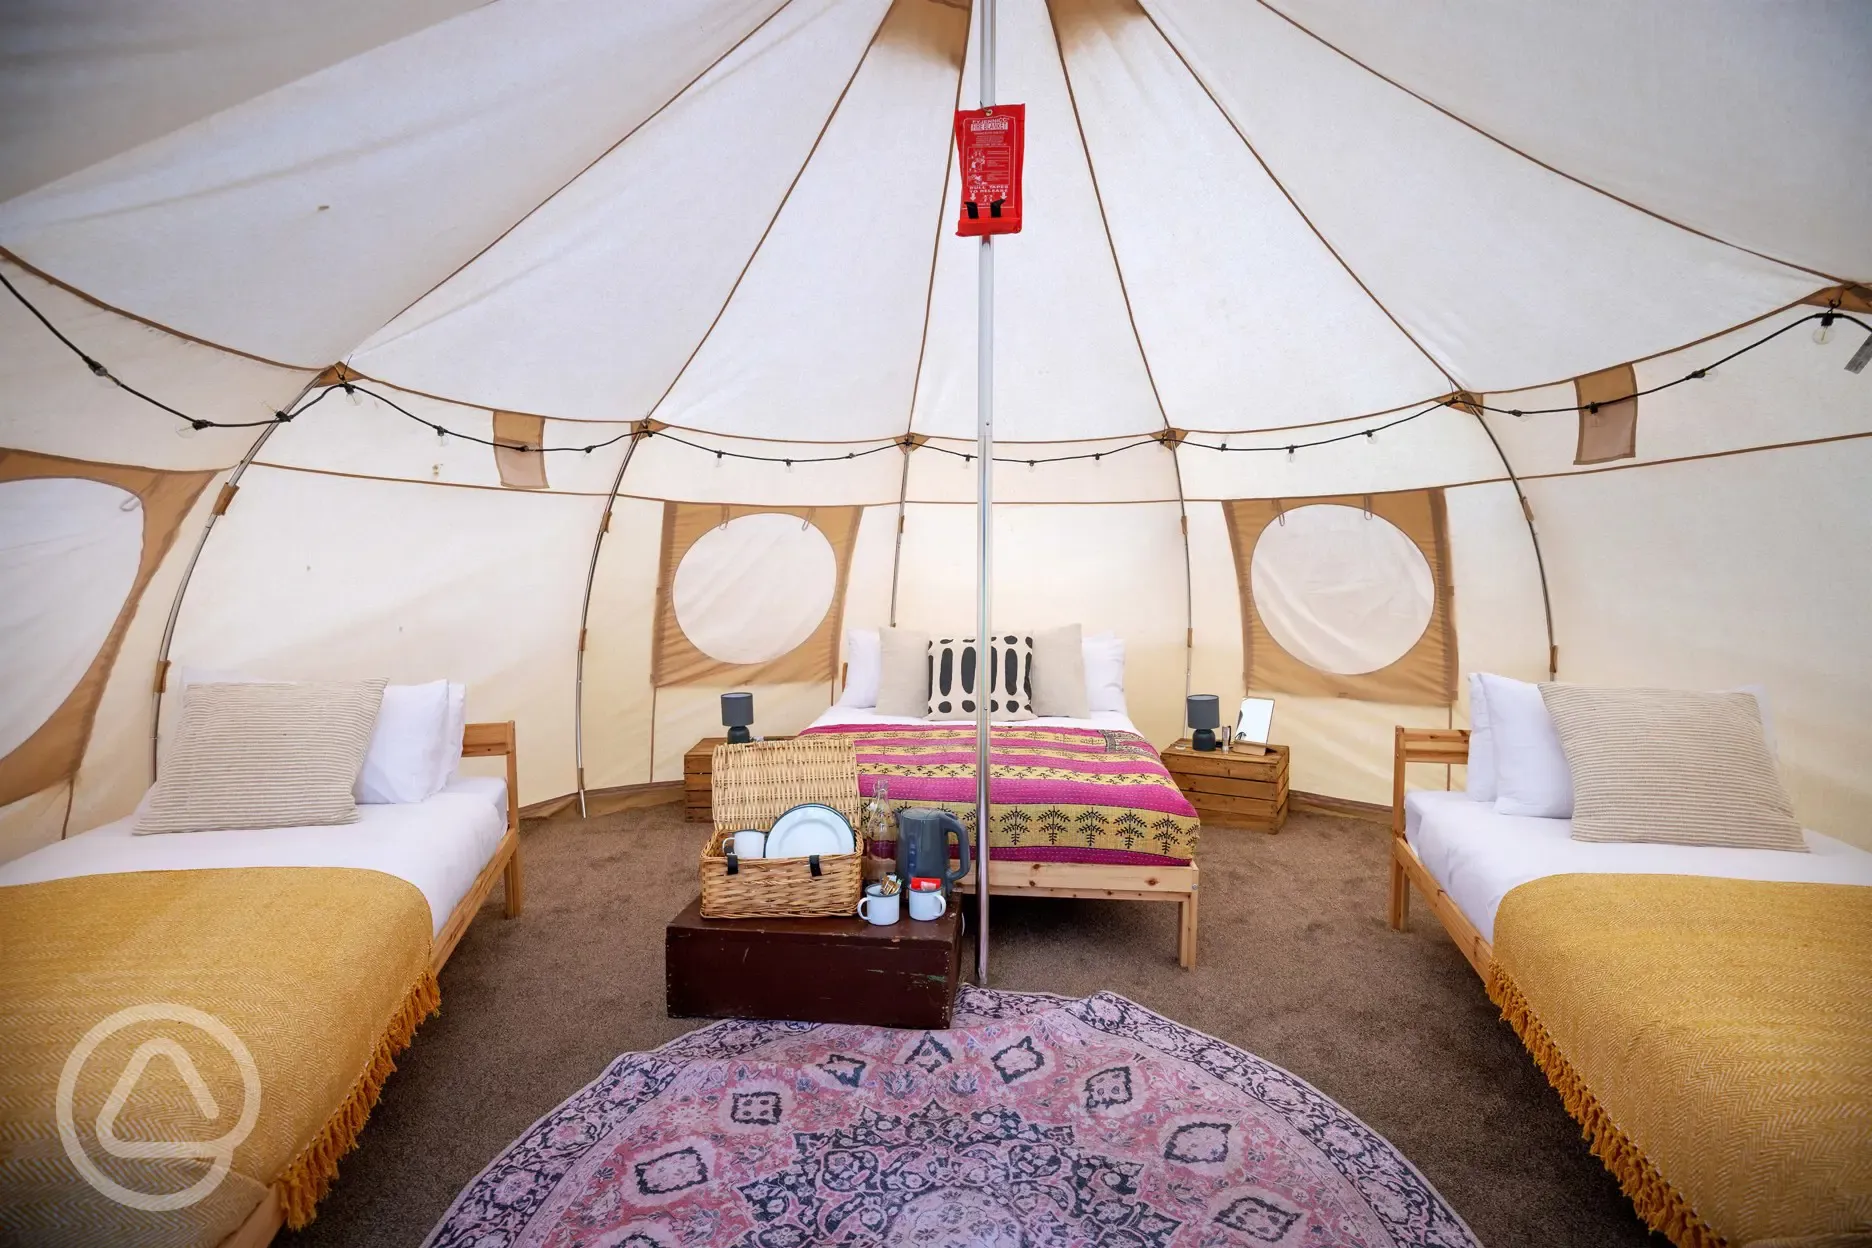 Five furnished luxury bell tents, each sleeps up to four people